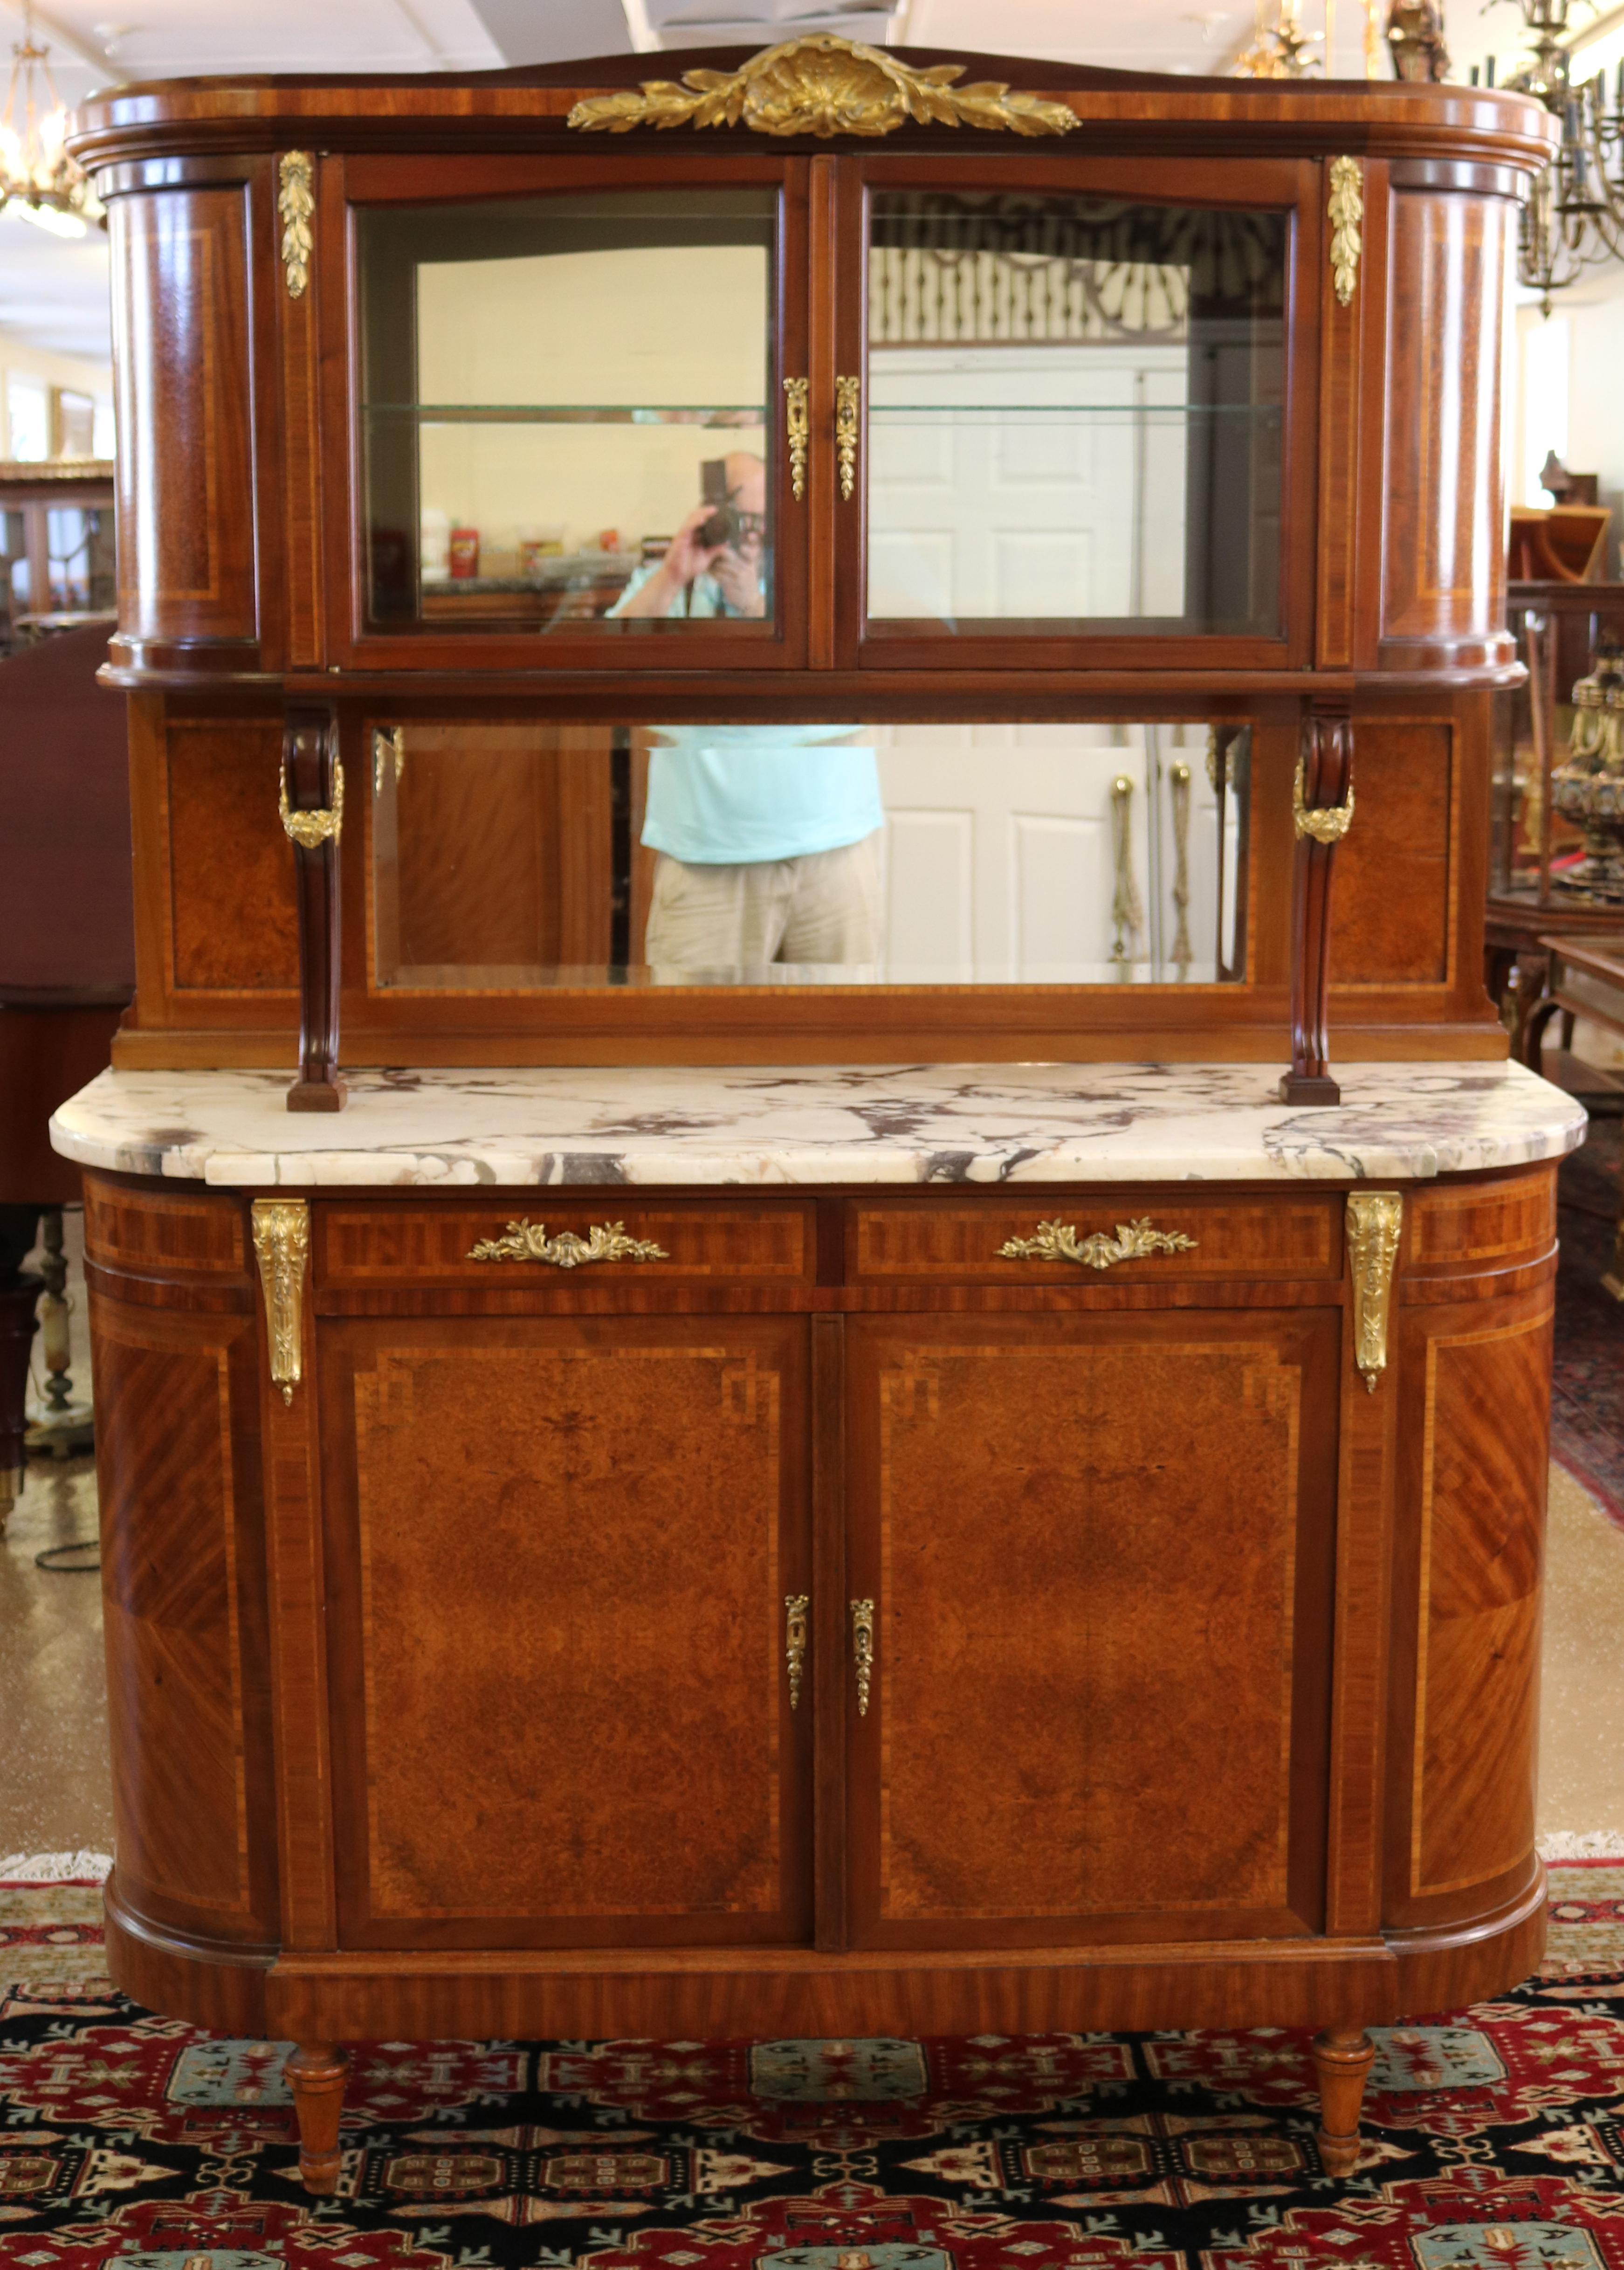 French Marble Top Inlaid Louis XVI Style Display Cabinet Sideboard Buffet

Dimensions : 84